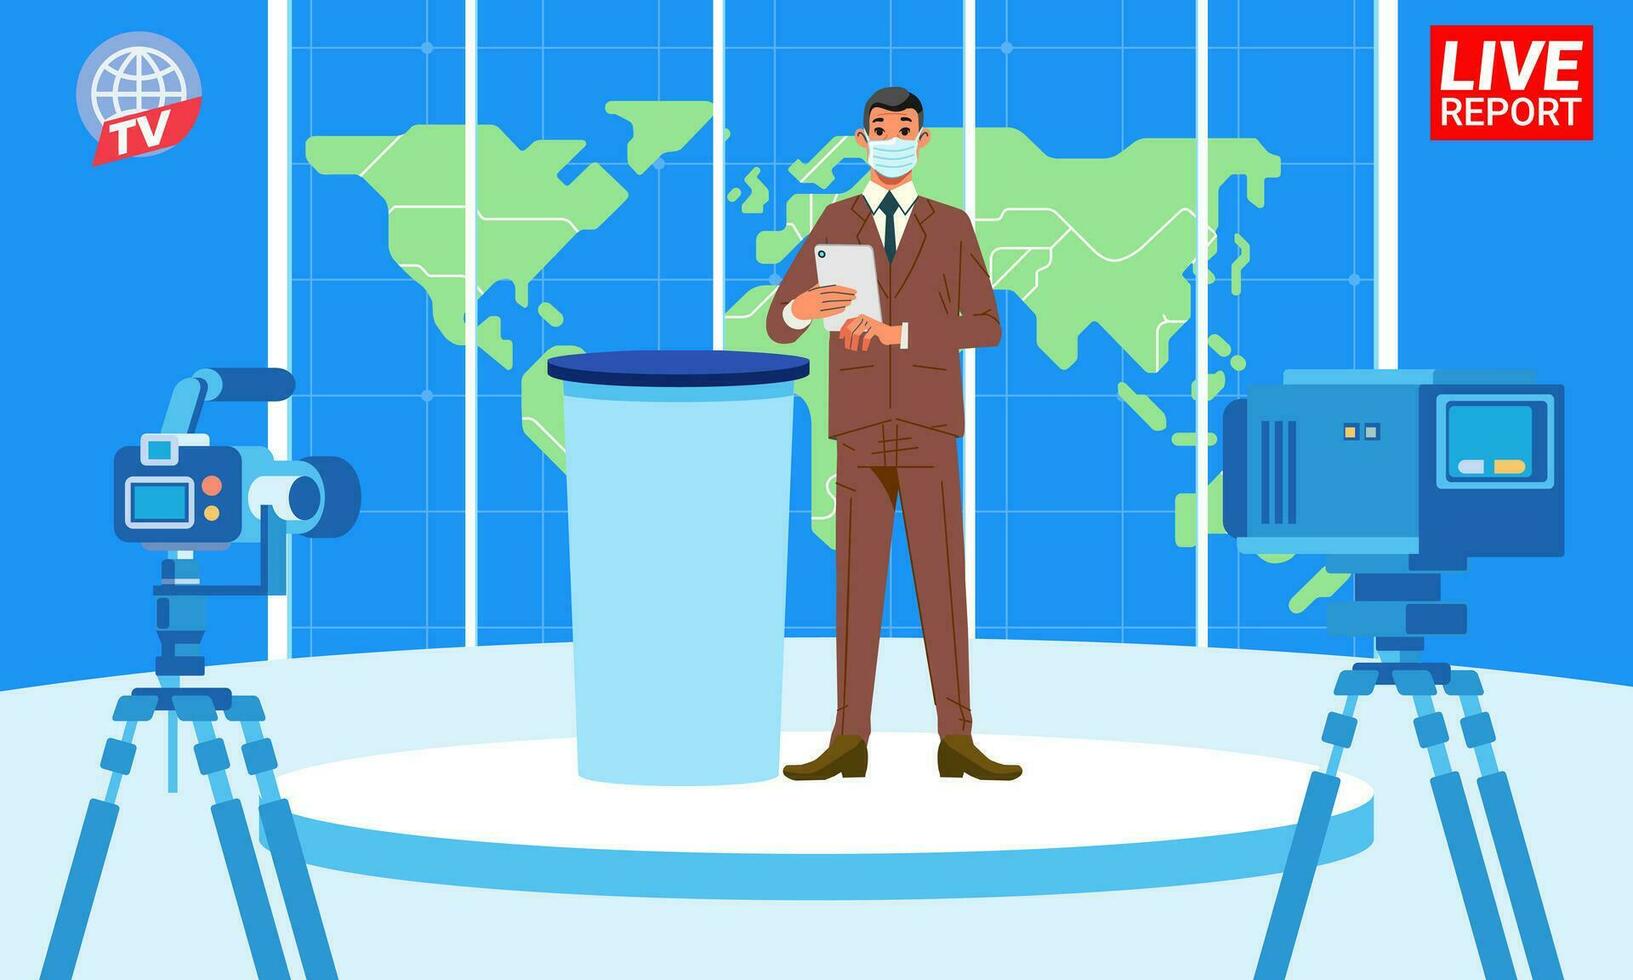 News anchors with medical mask reporting in TV studio presenters on table on pedestal with world map background vector